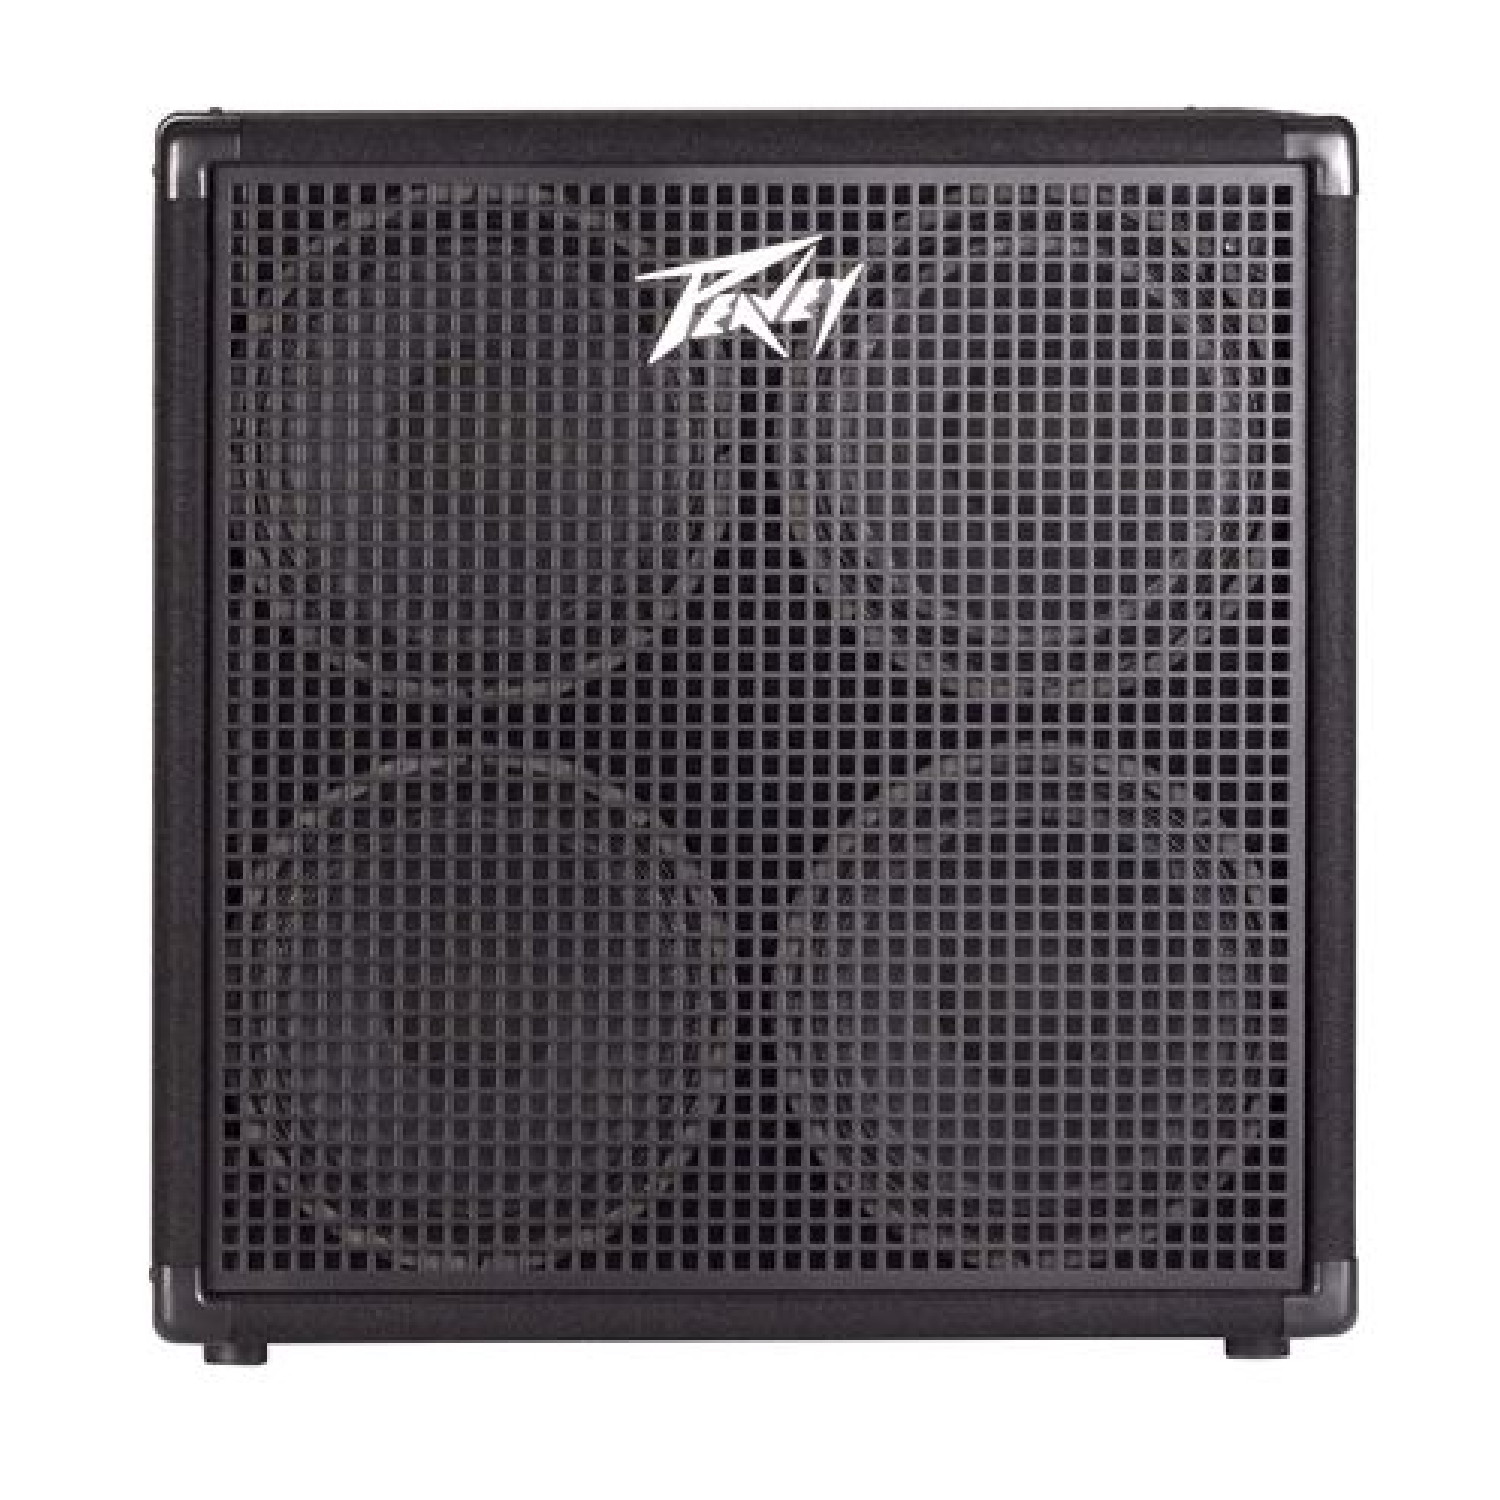 4 x 10 Inches Bass Amp Cabinet 8 Ohms at 800W Headliner 410 peavey